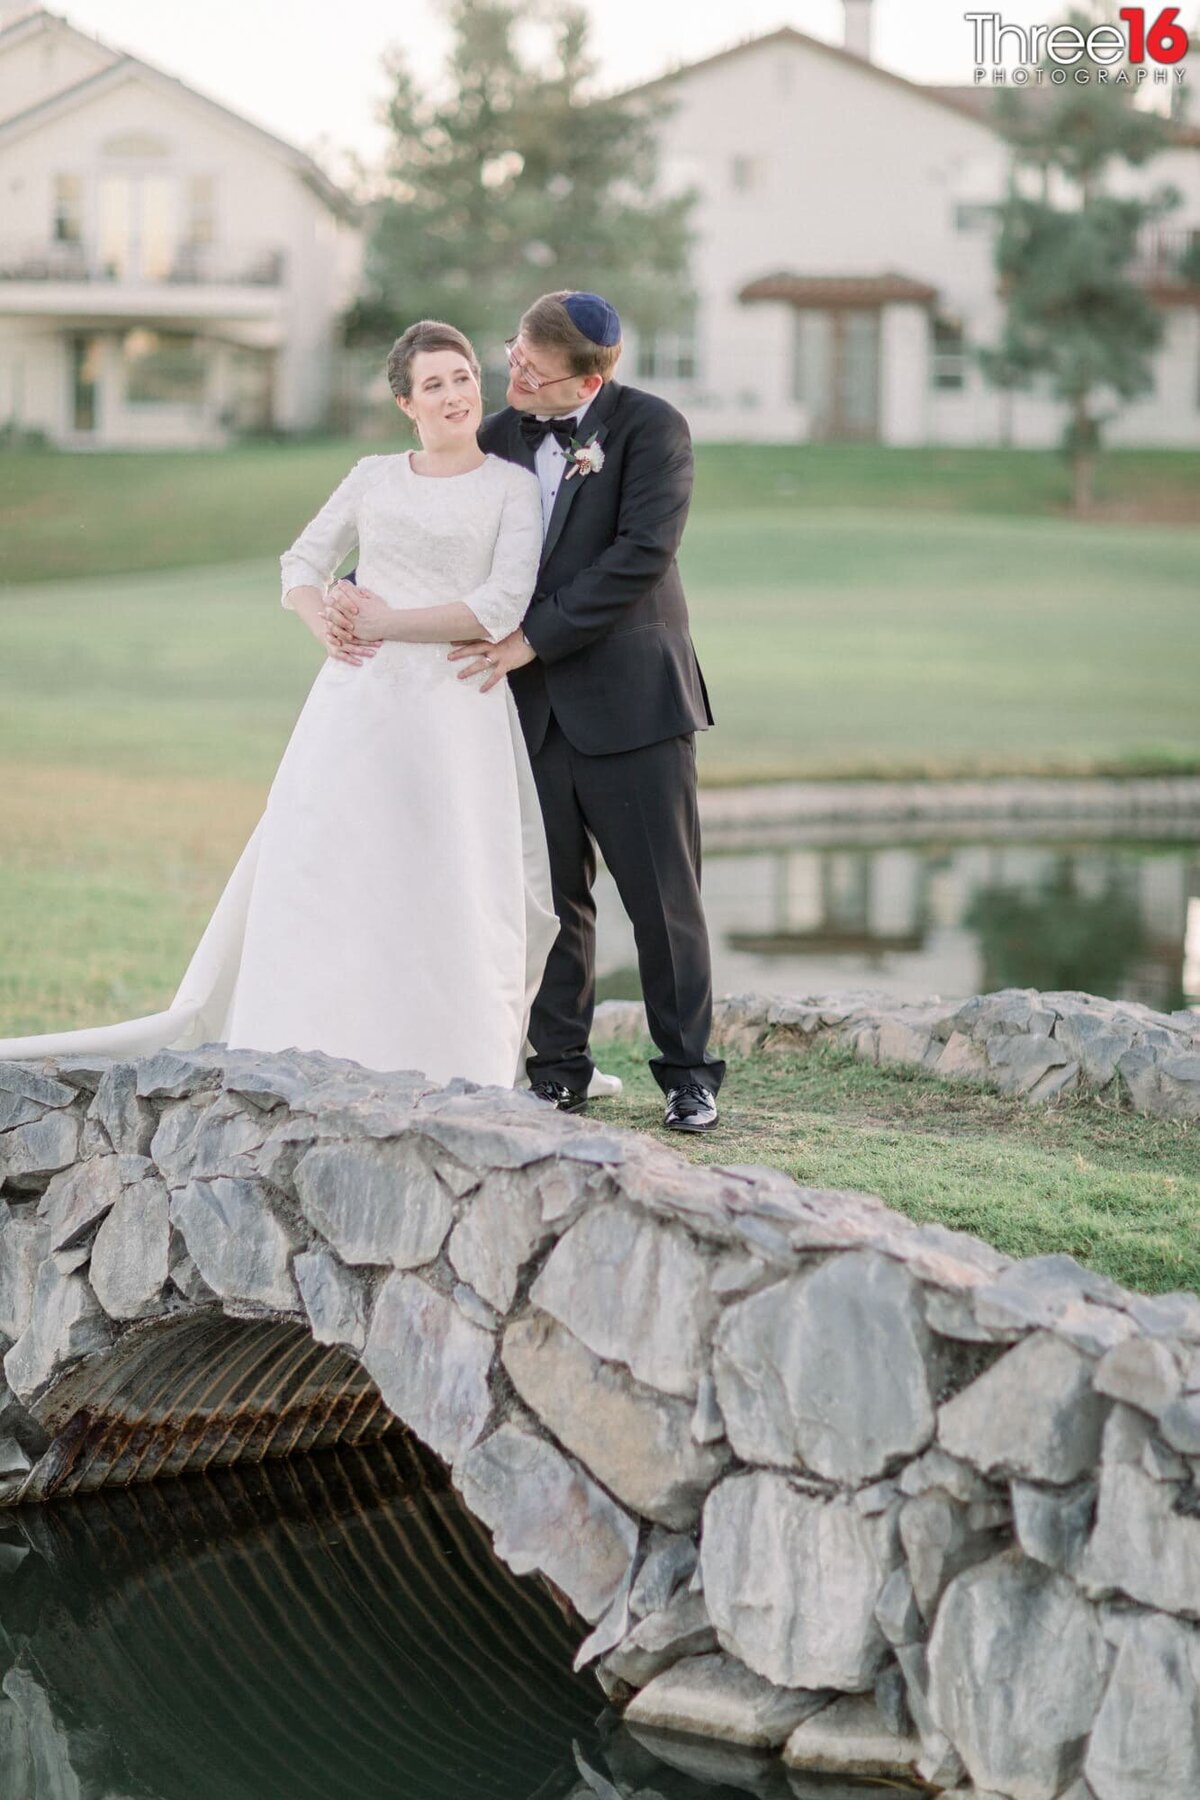 Married couple pose together on a grassy bridge going over a creek on the golf course